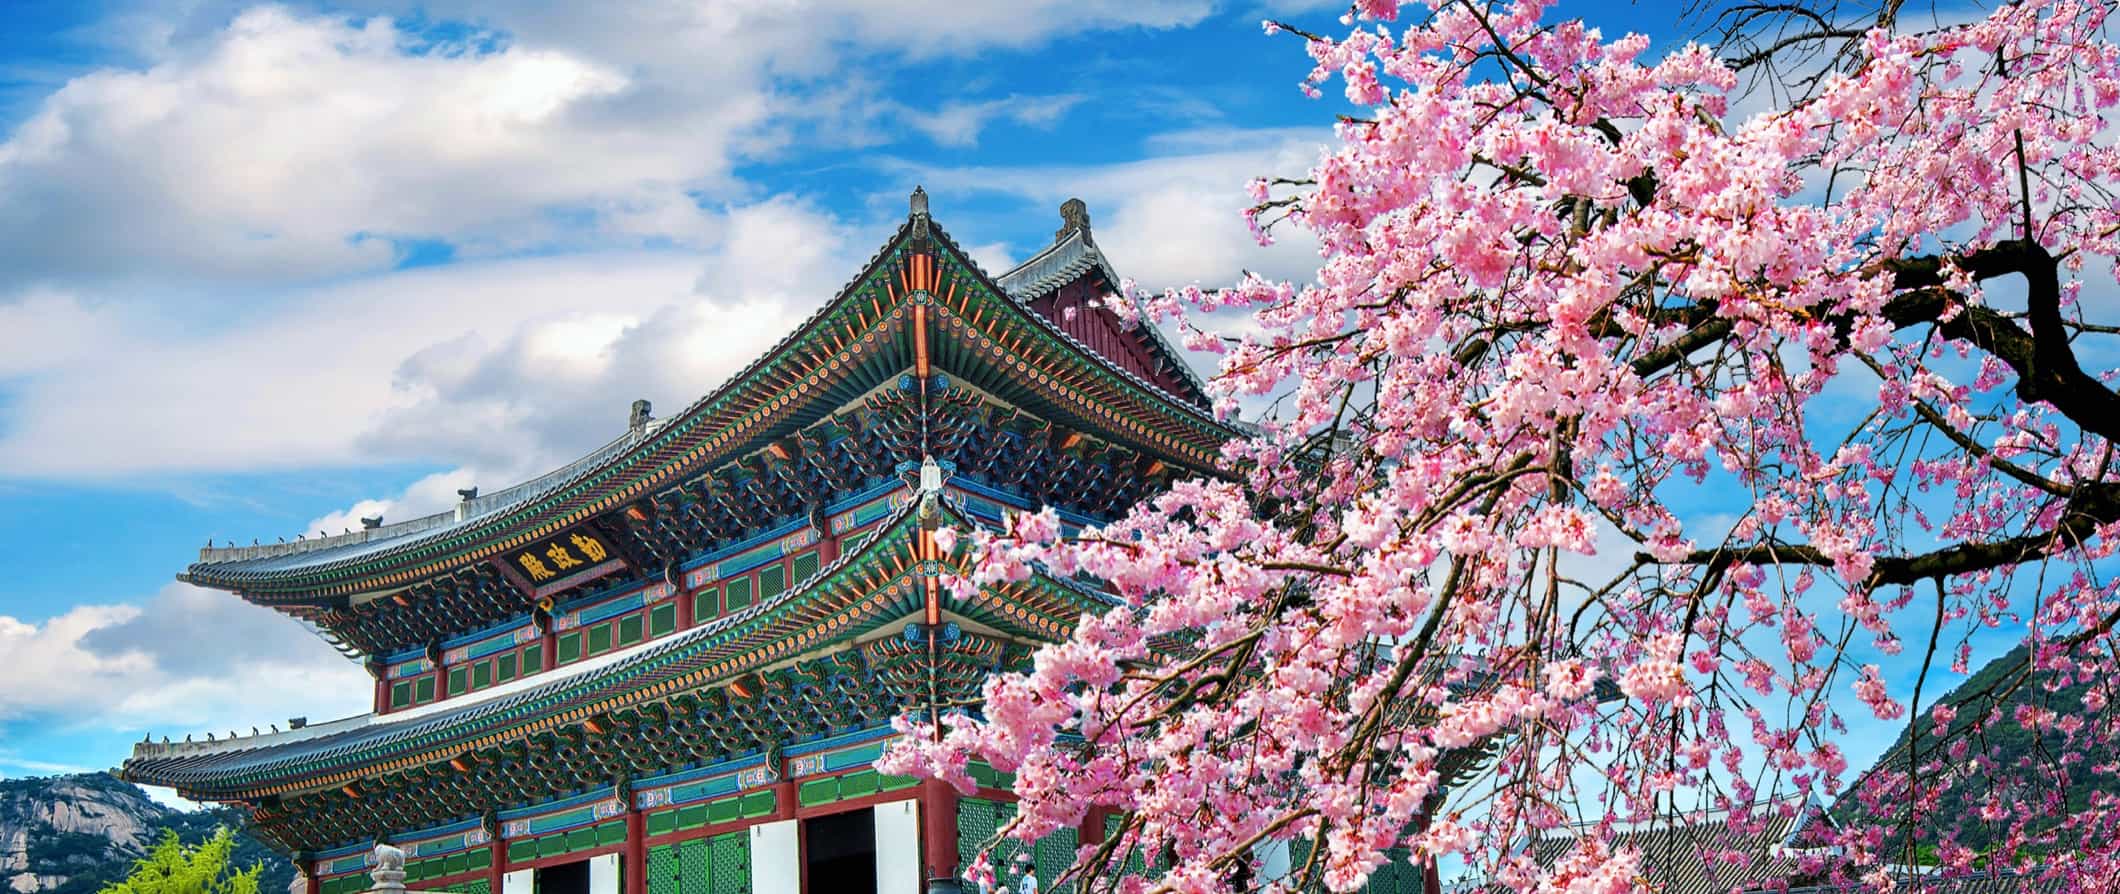 A colorful temple in South Korea near a cherry blossom tree on a bright sunny day